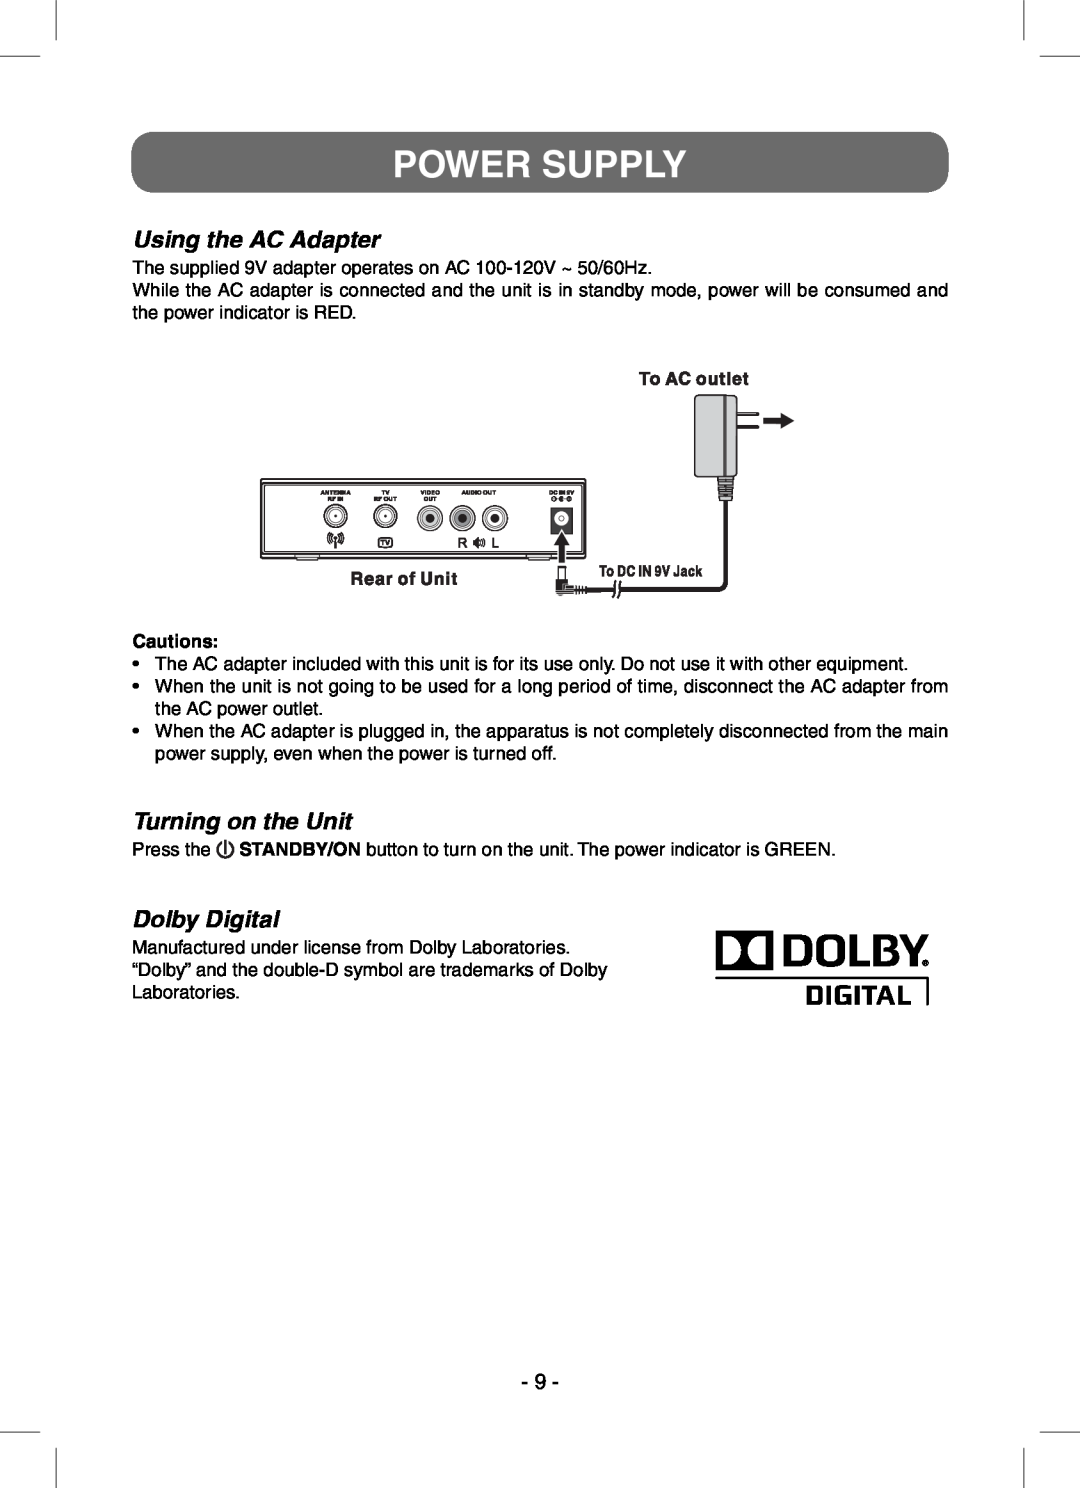 RCA STB7766C user manual Power Supply, Using the AC Adapter, Turning on the Unit, Dolby Digital, Cautions 